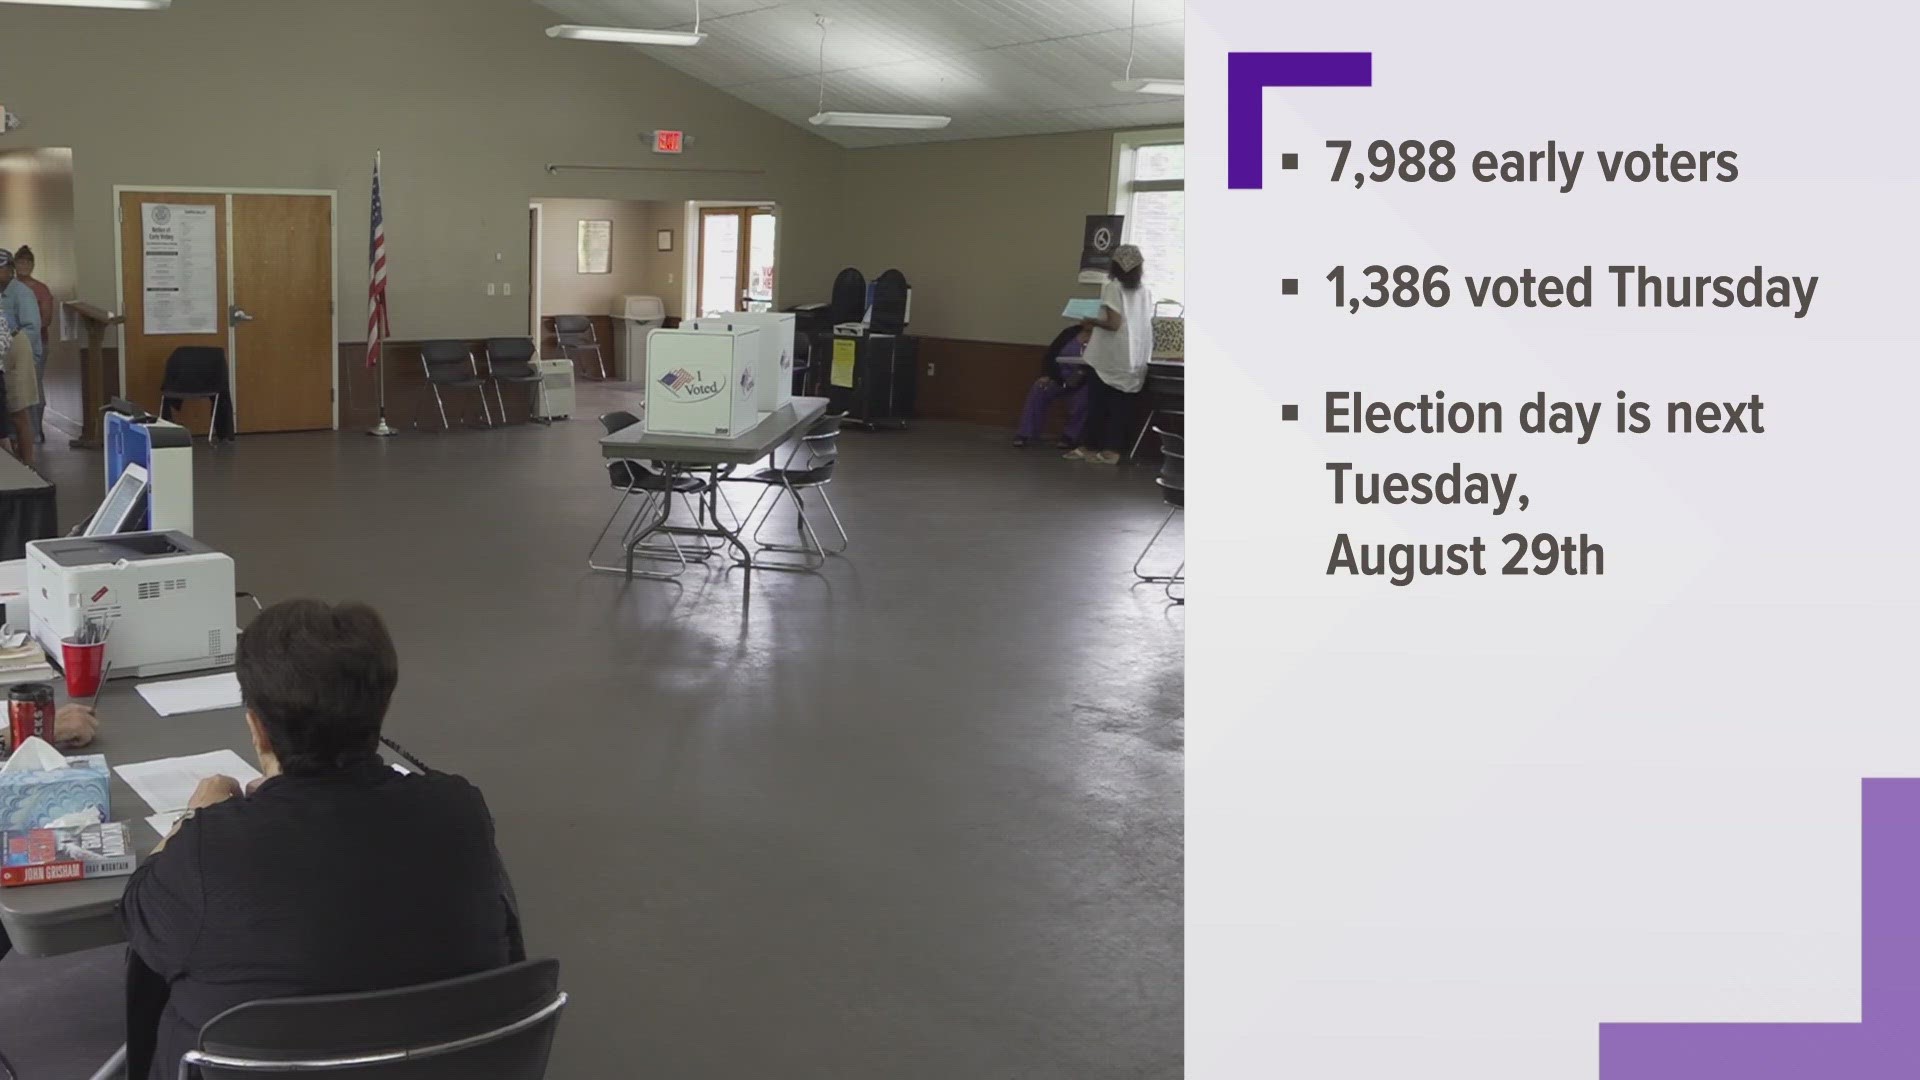 City officials said of the 64,585 registered voters in Knoxville who voted in the 2020 presidential election, only 8,058 have voted in this election.